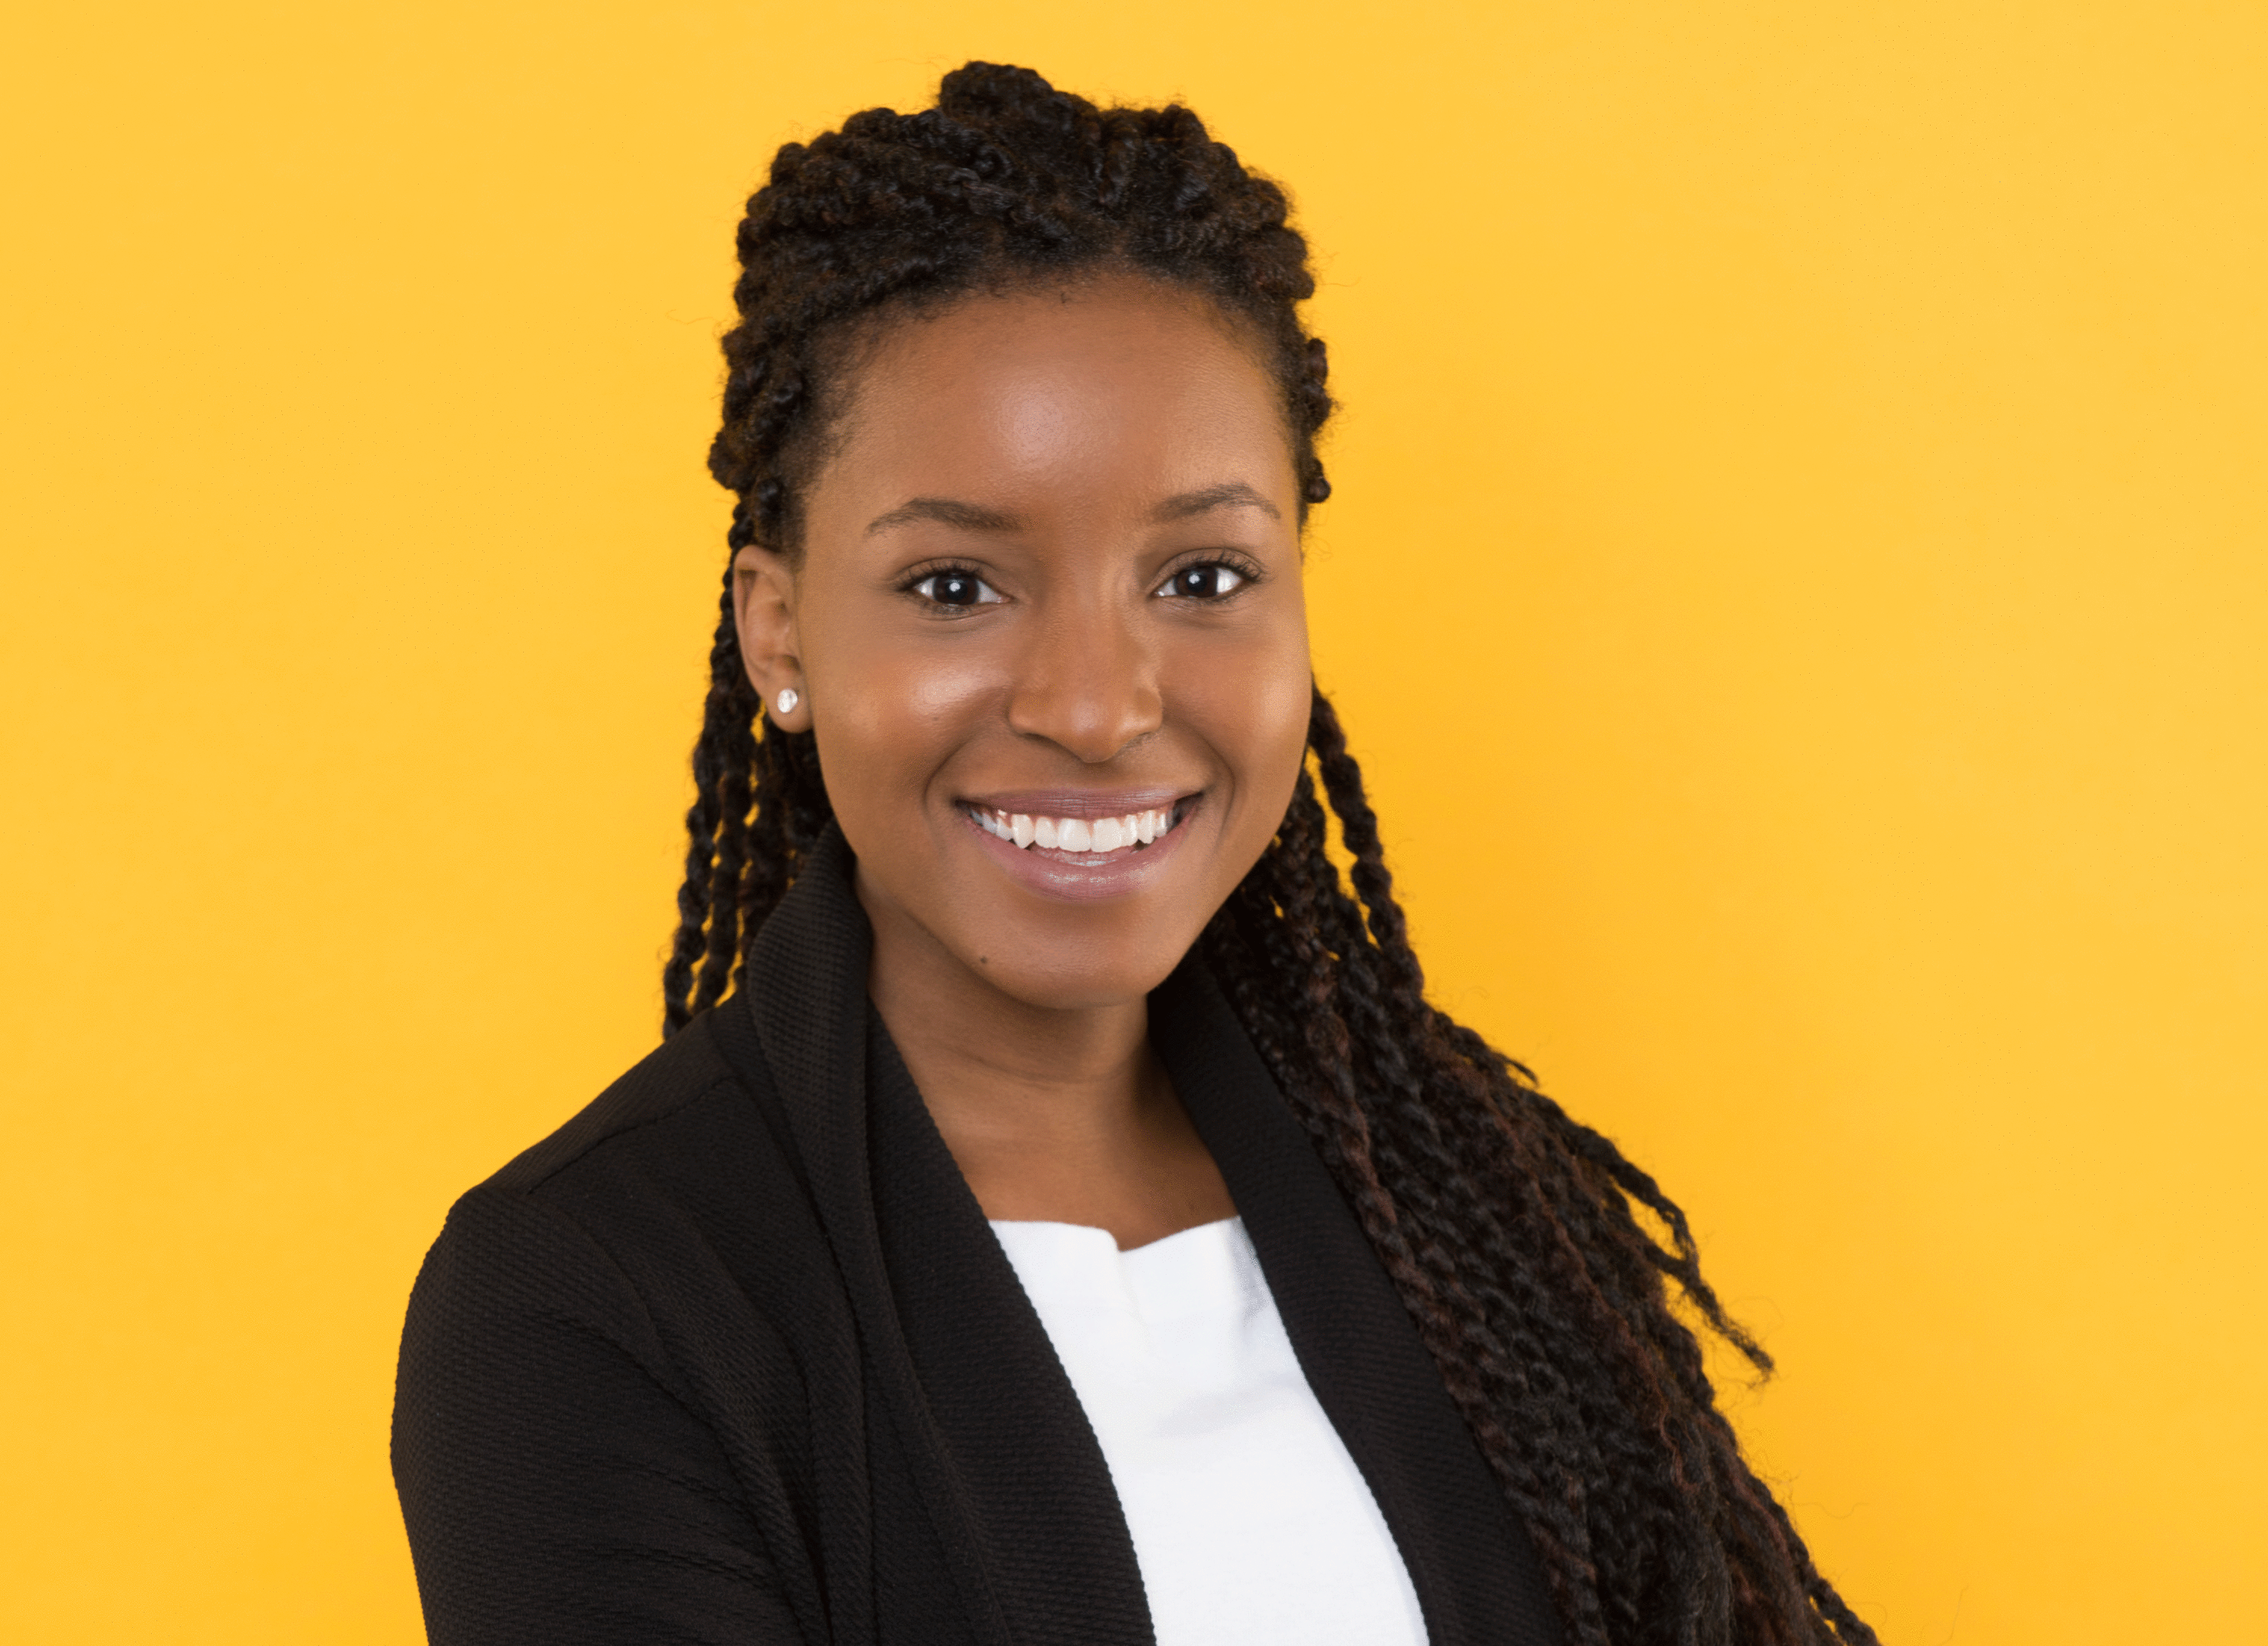 Professional headshot of class of 2019 student Genelle Martin